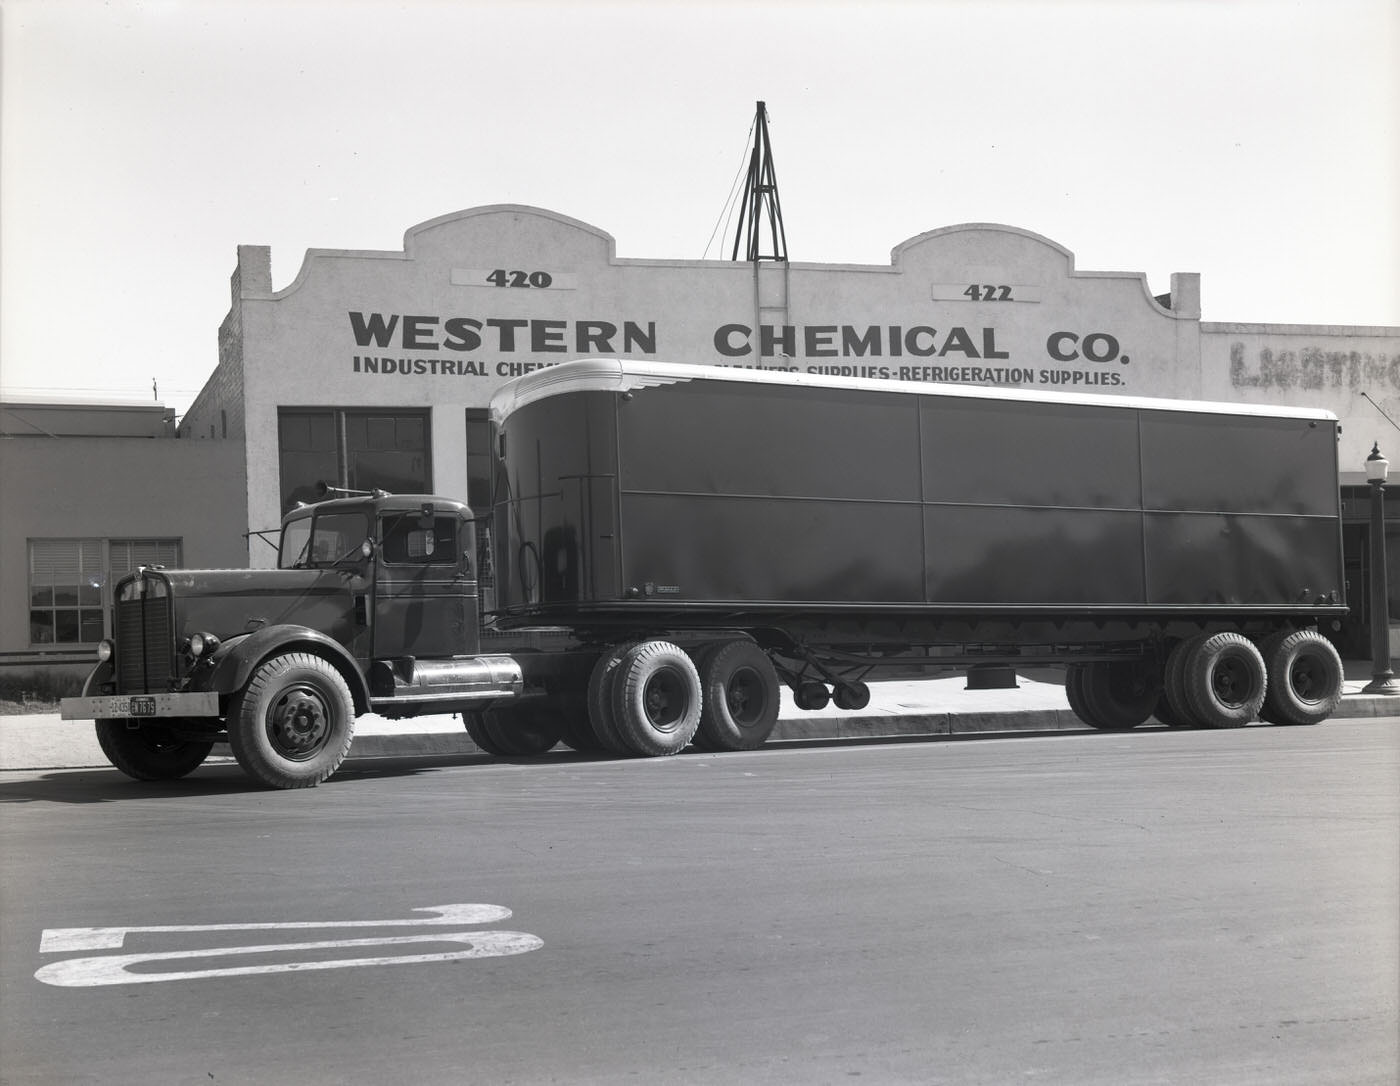 Truck Outside Western Chemical Co. Building, 1945